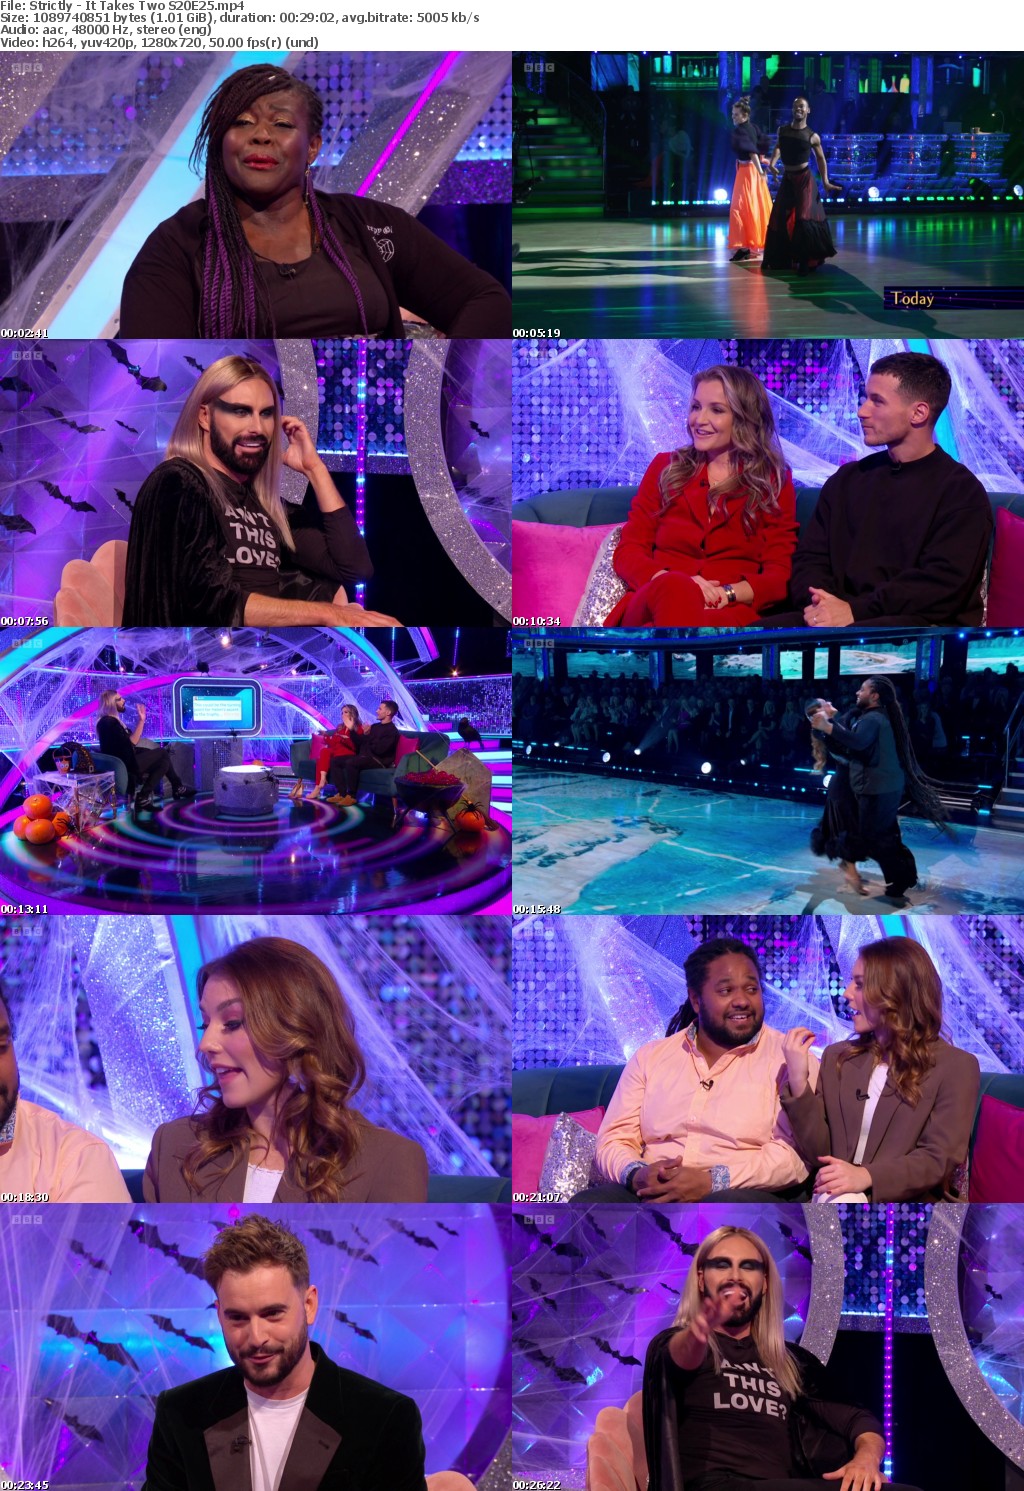 Strictly - It Takes Two S20E25 (1280x720p HD, 50fps, soft Eng subs)